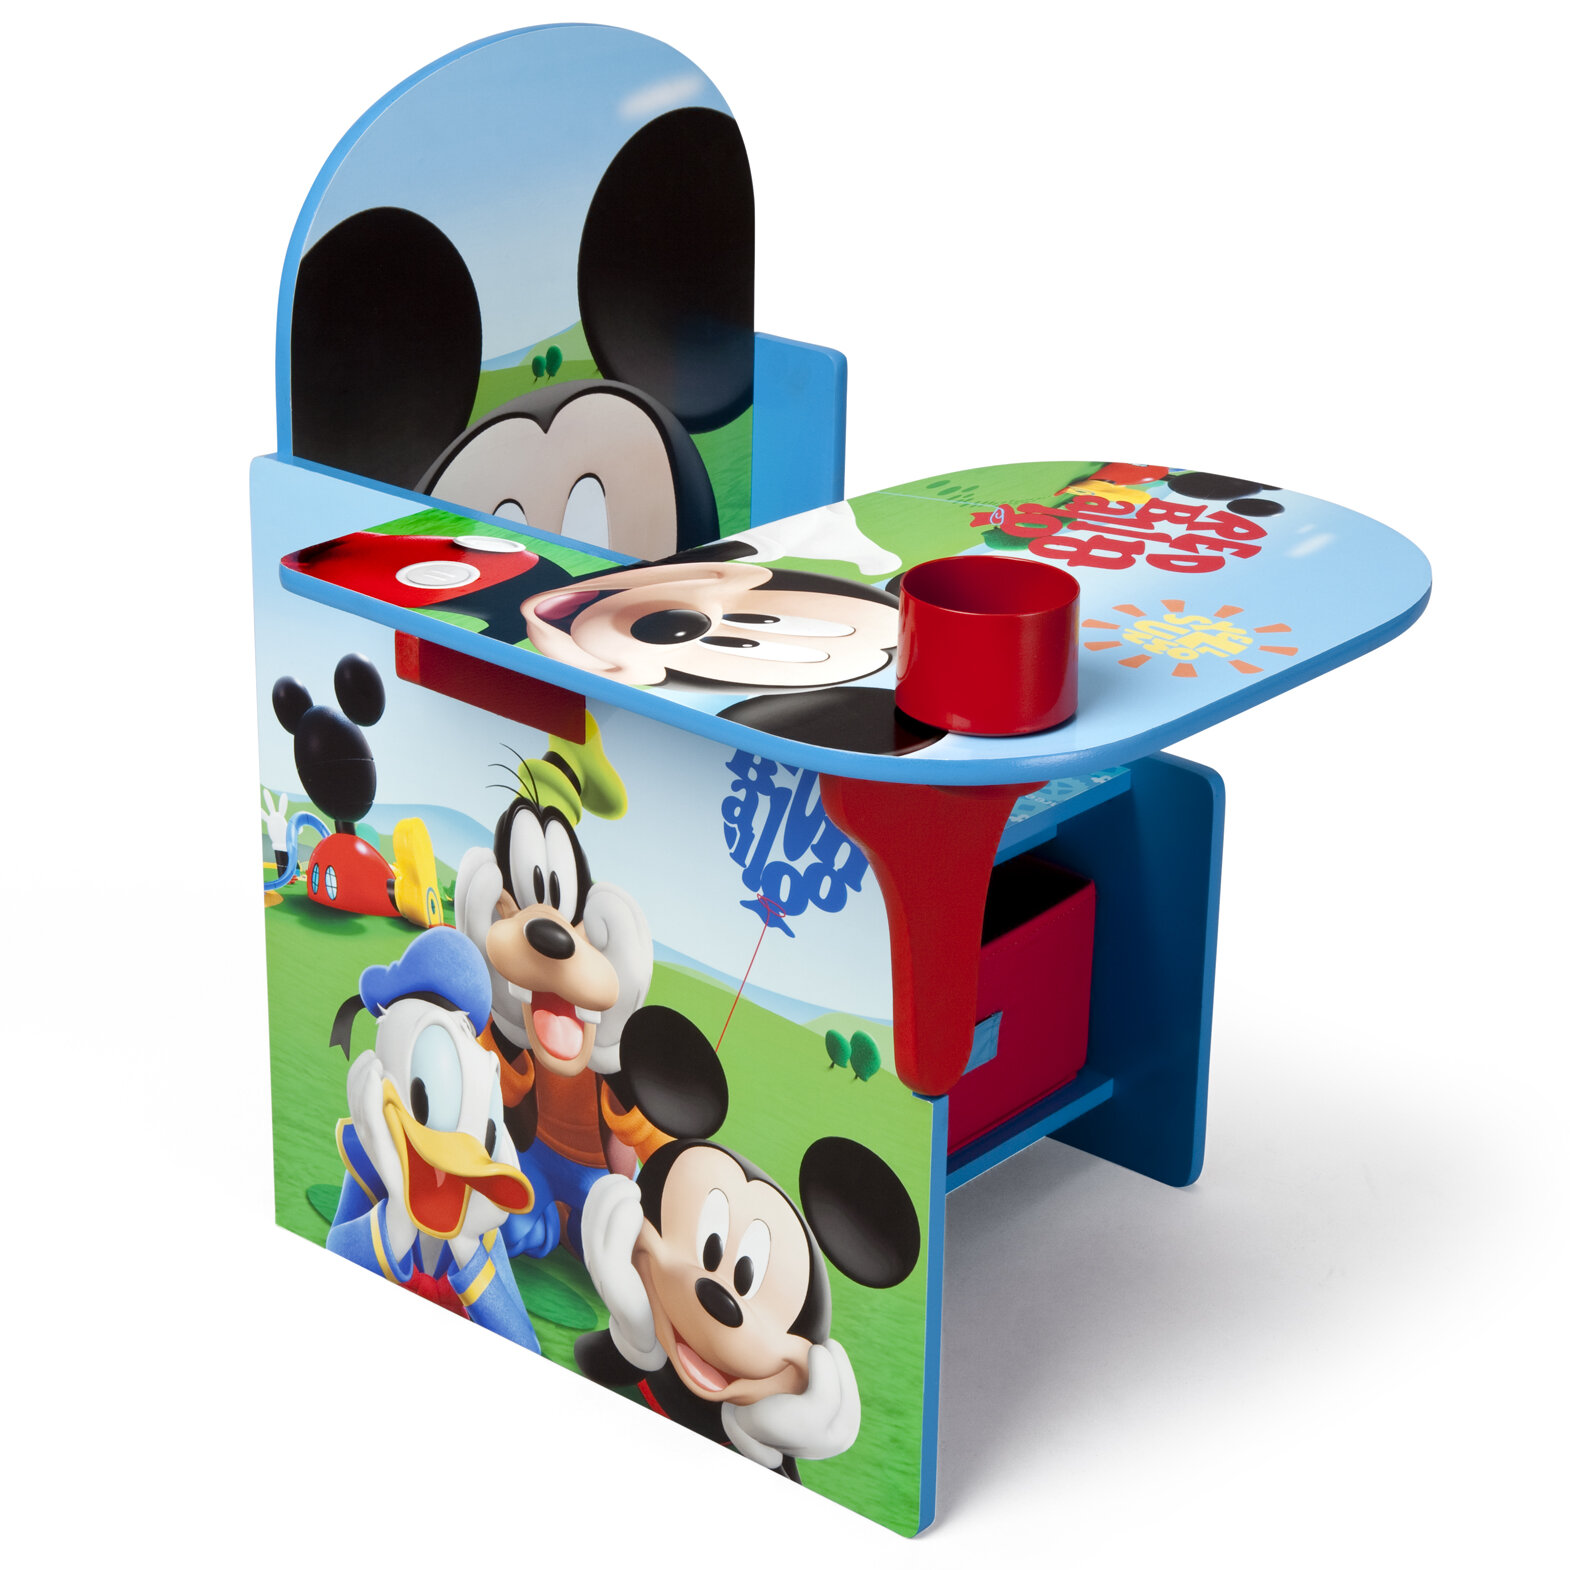 Disney Mickey Mouse Toy and Book Organizer - Delta Children